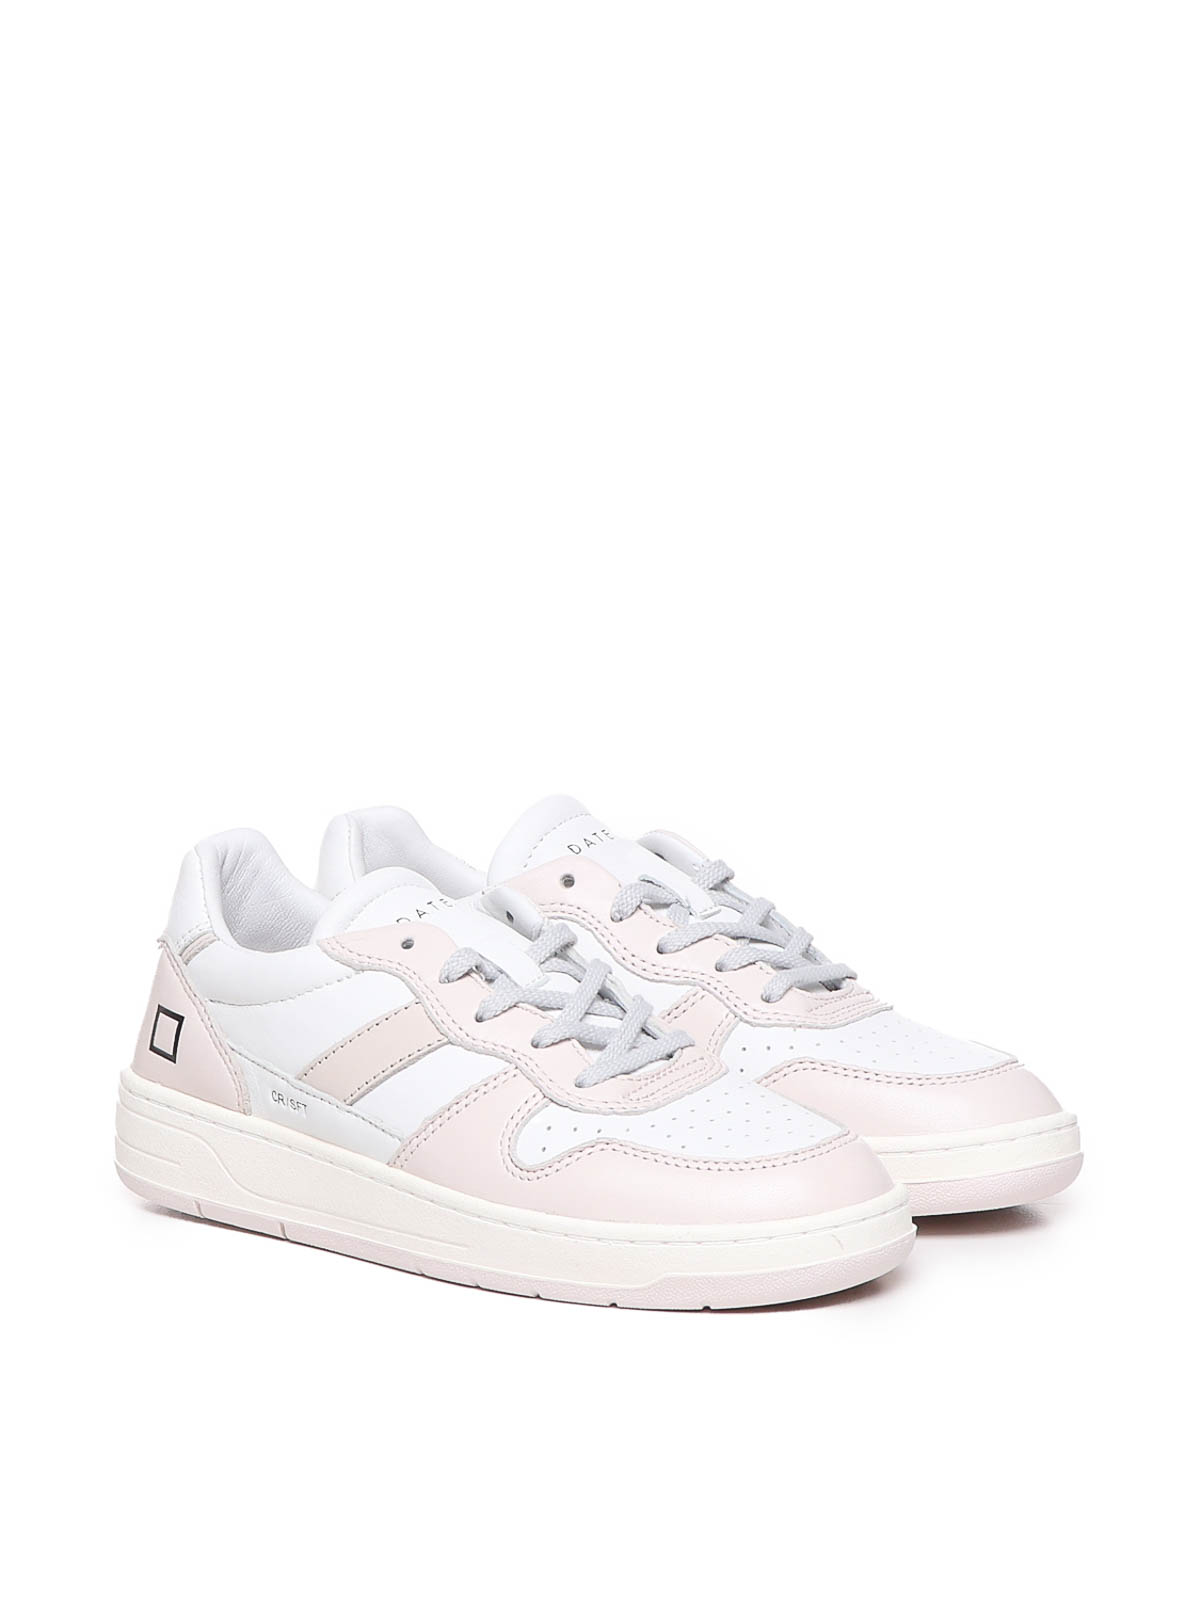 Shop Date Court 20 Soft Sneakers In White